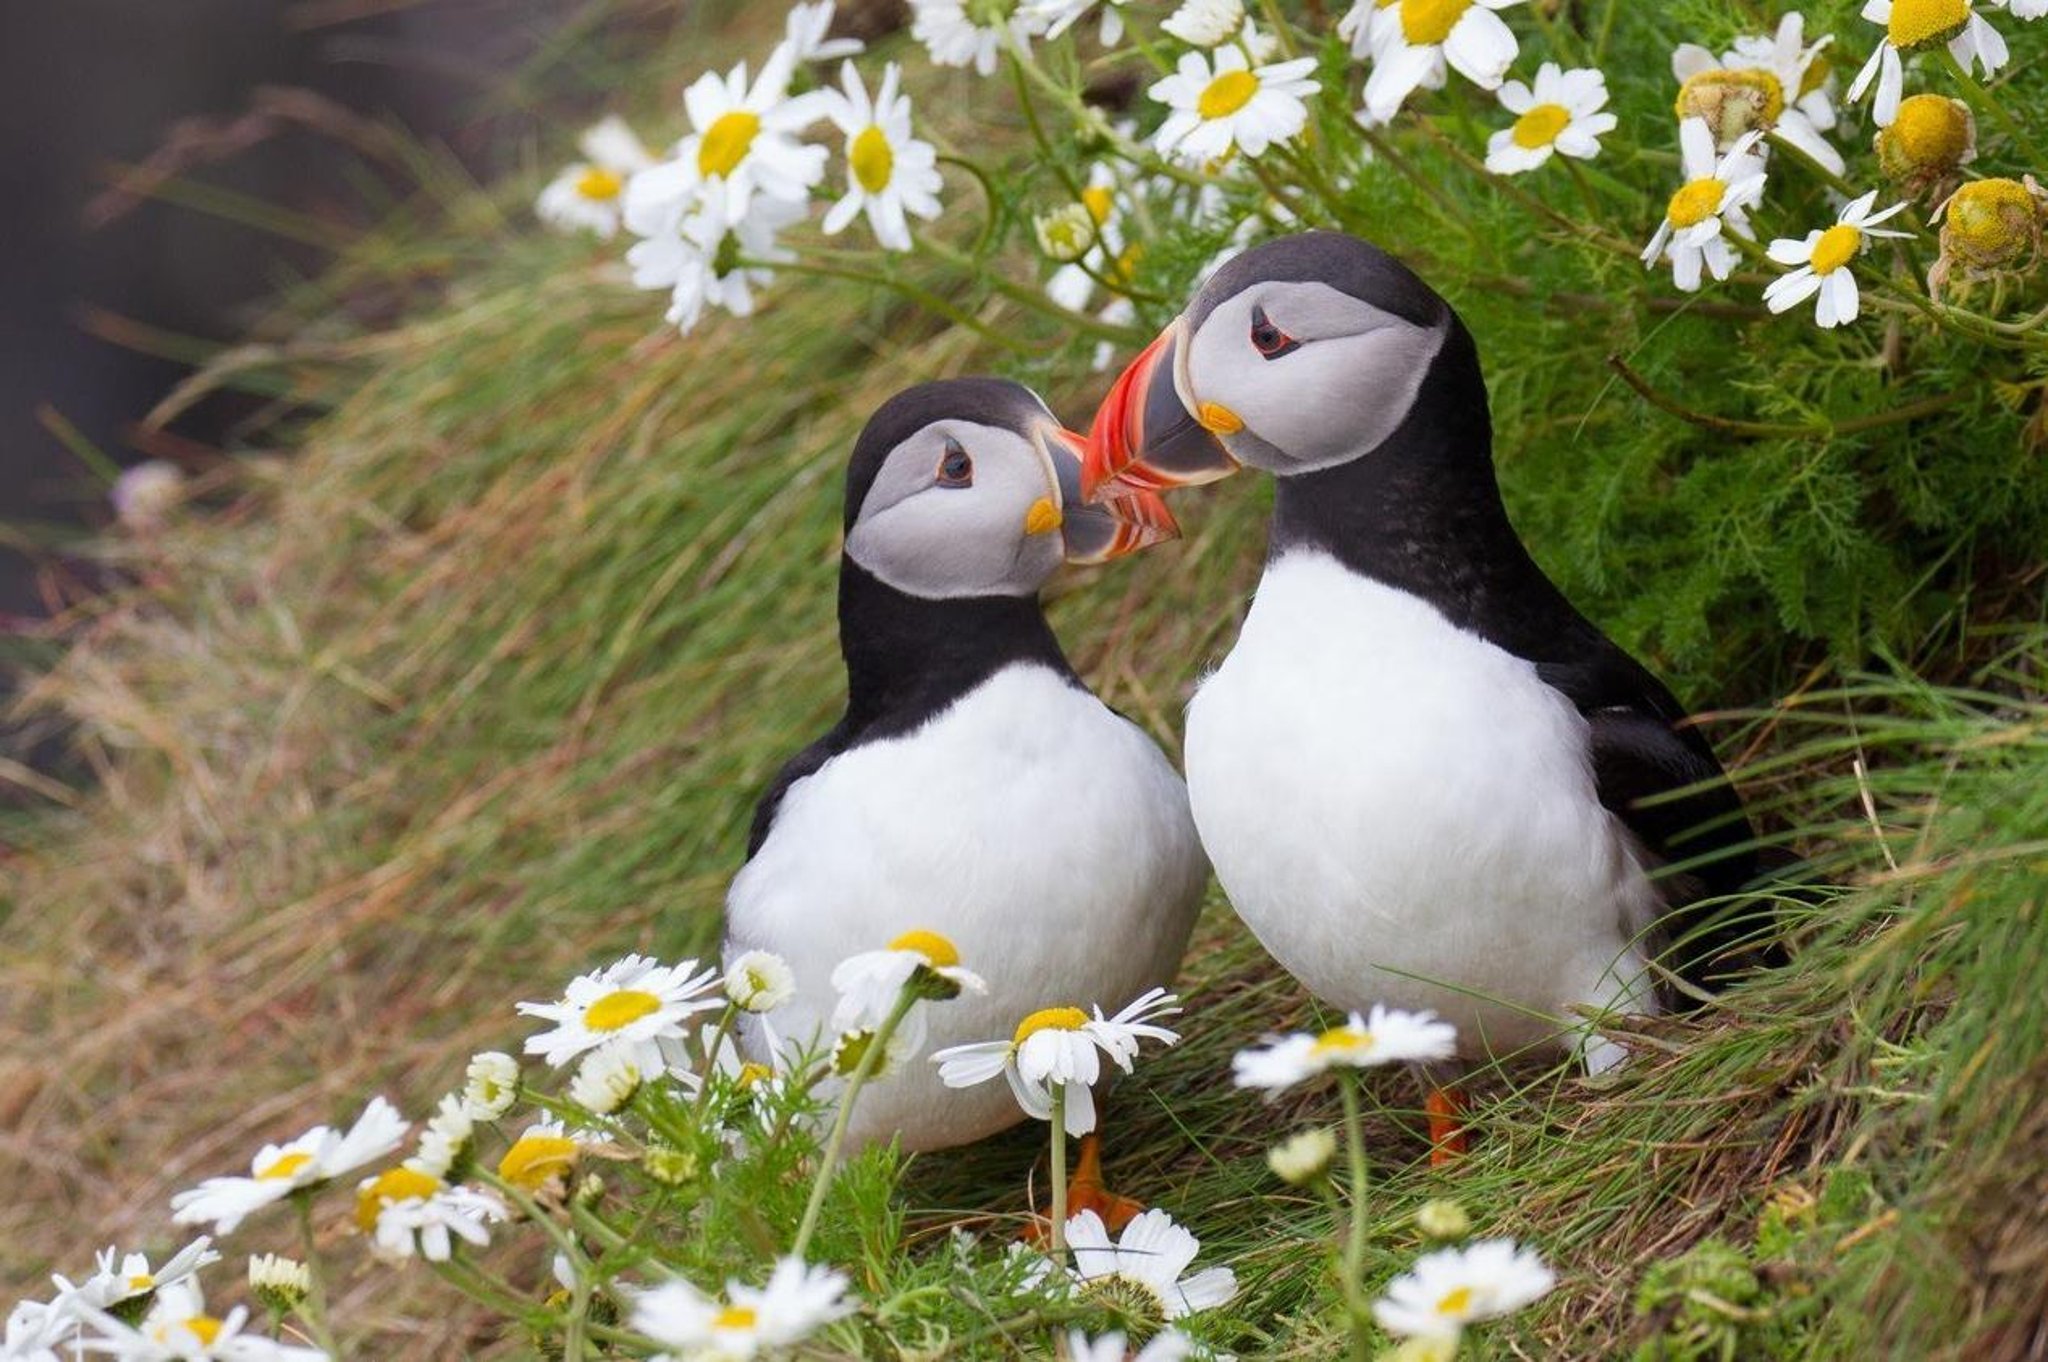 Punctual puffins arrive for Easter at Rathlin Island